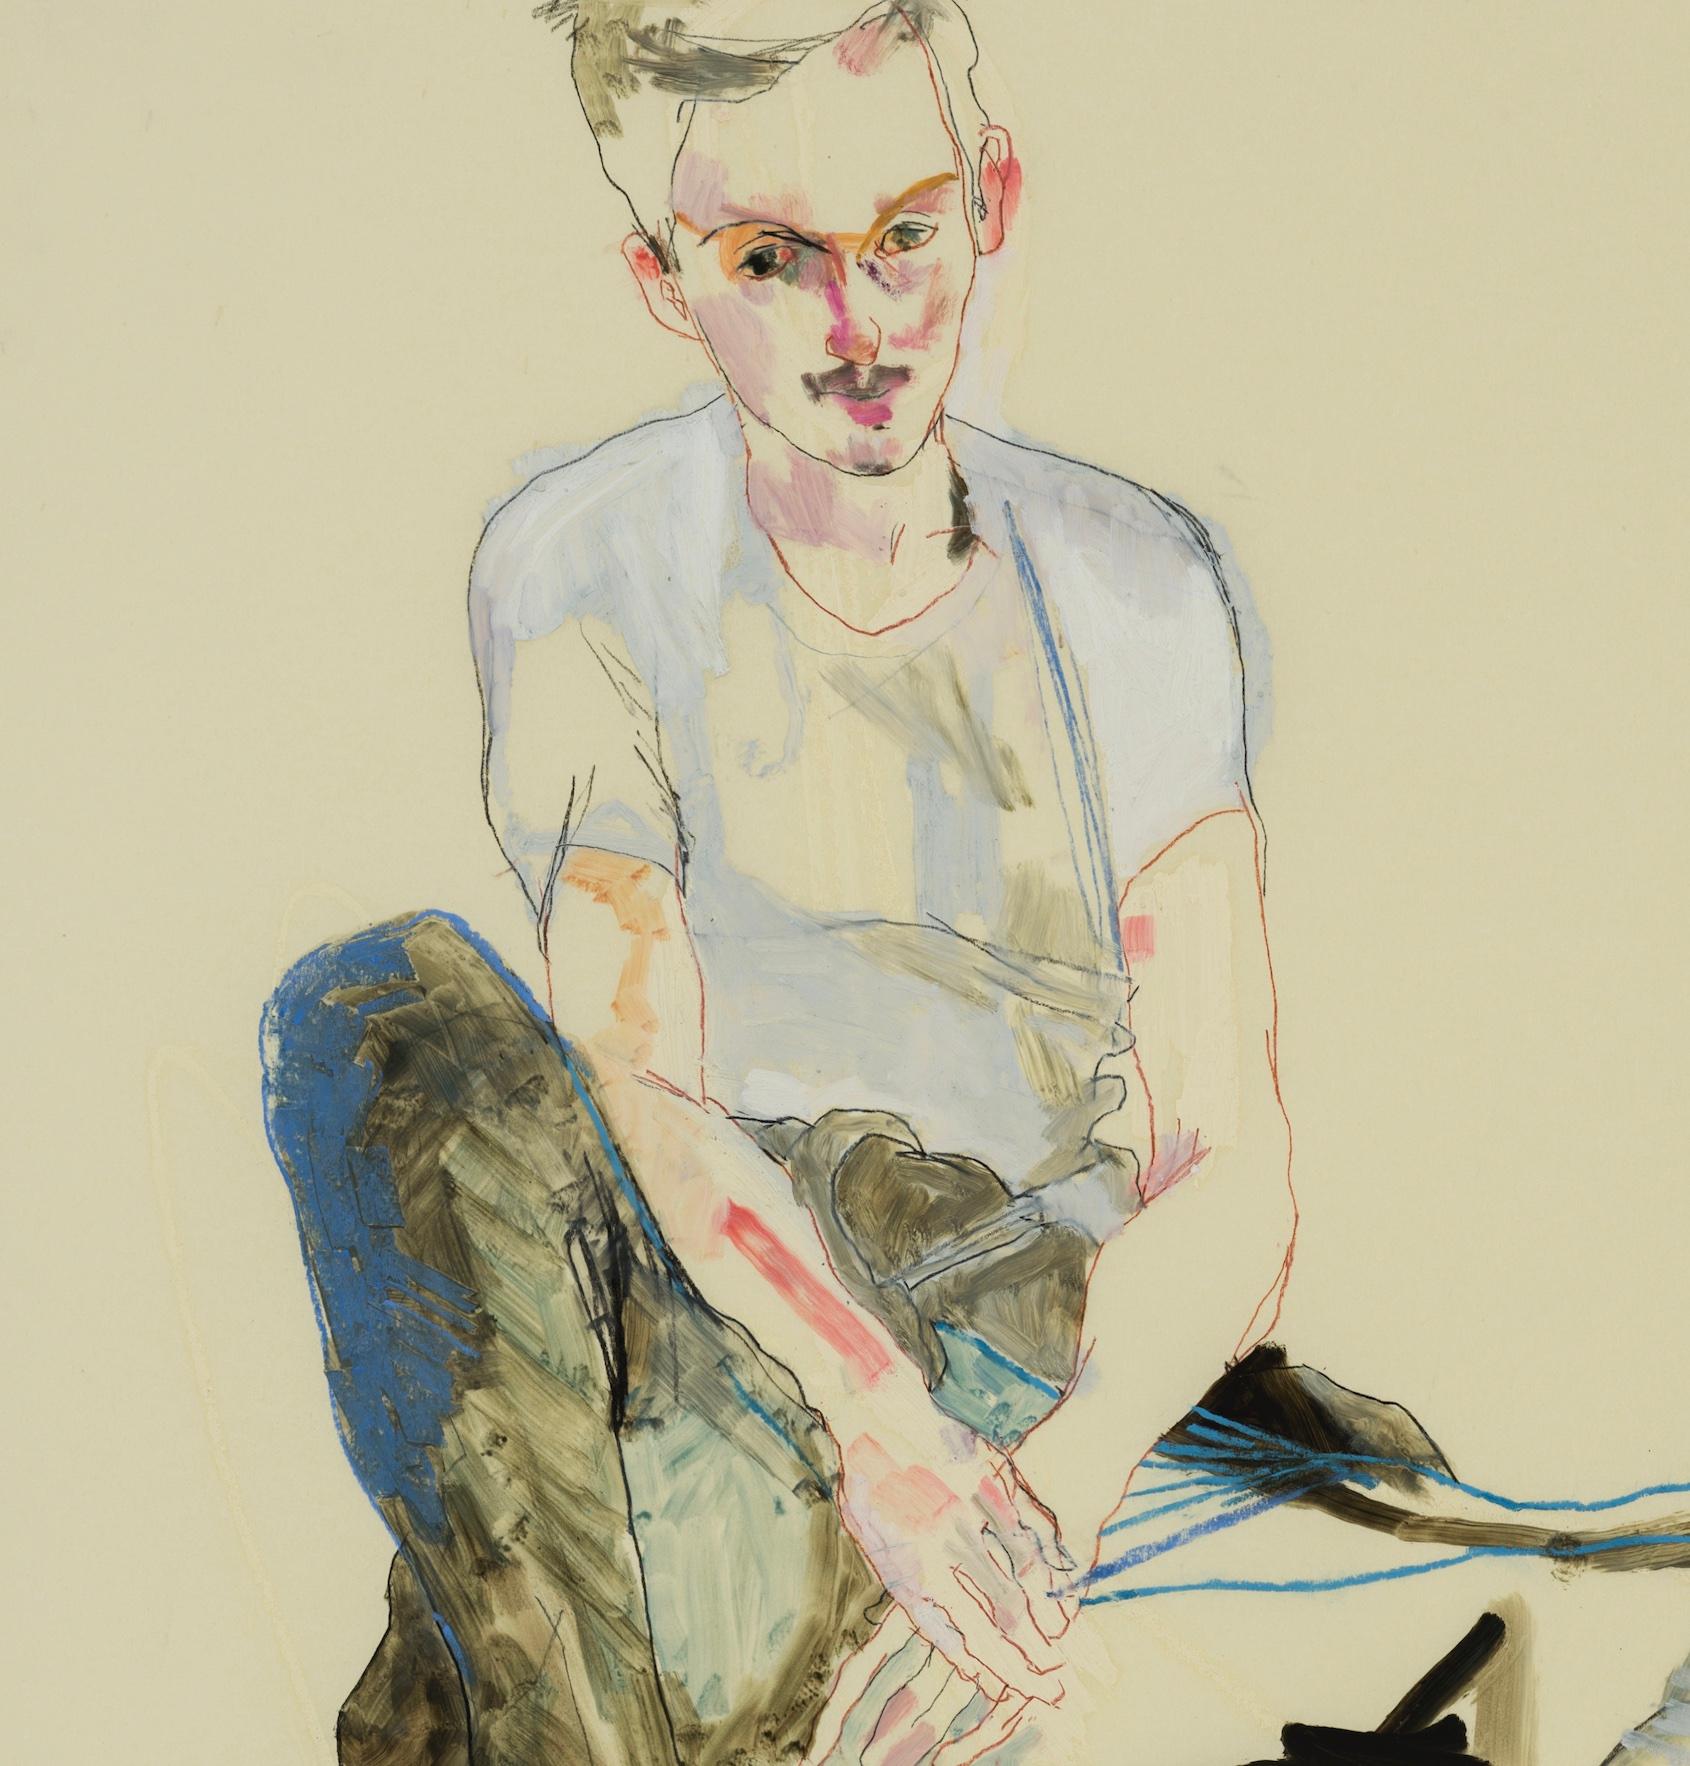 Howard Tangye (b.1948, Australia) has been an influential force in fashion for decades. Lecturing at London’s Central Saint Martins for 35 years, including 16 years as head of BA Womenswear. There, he tutored many contemporary greats, including John